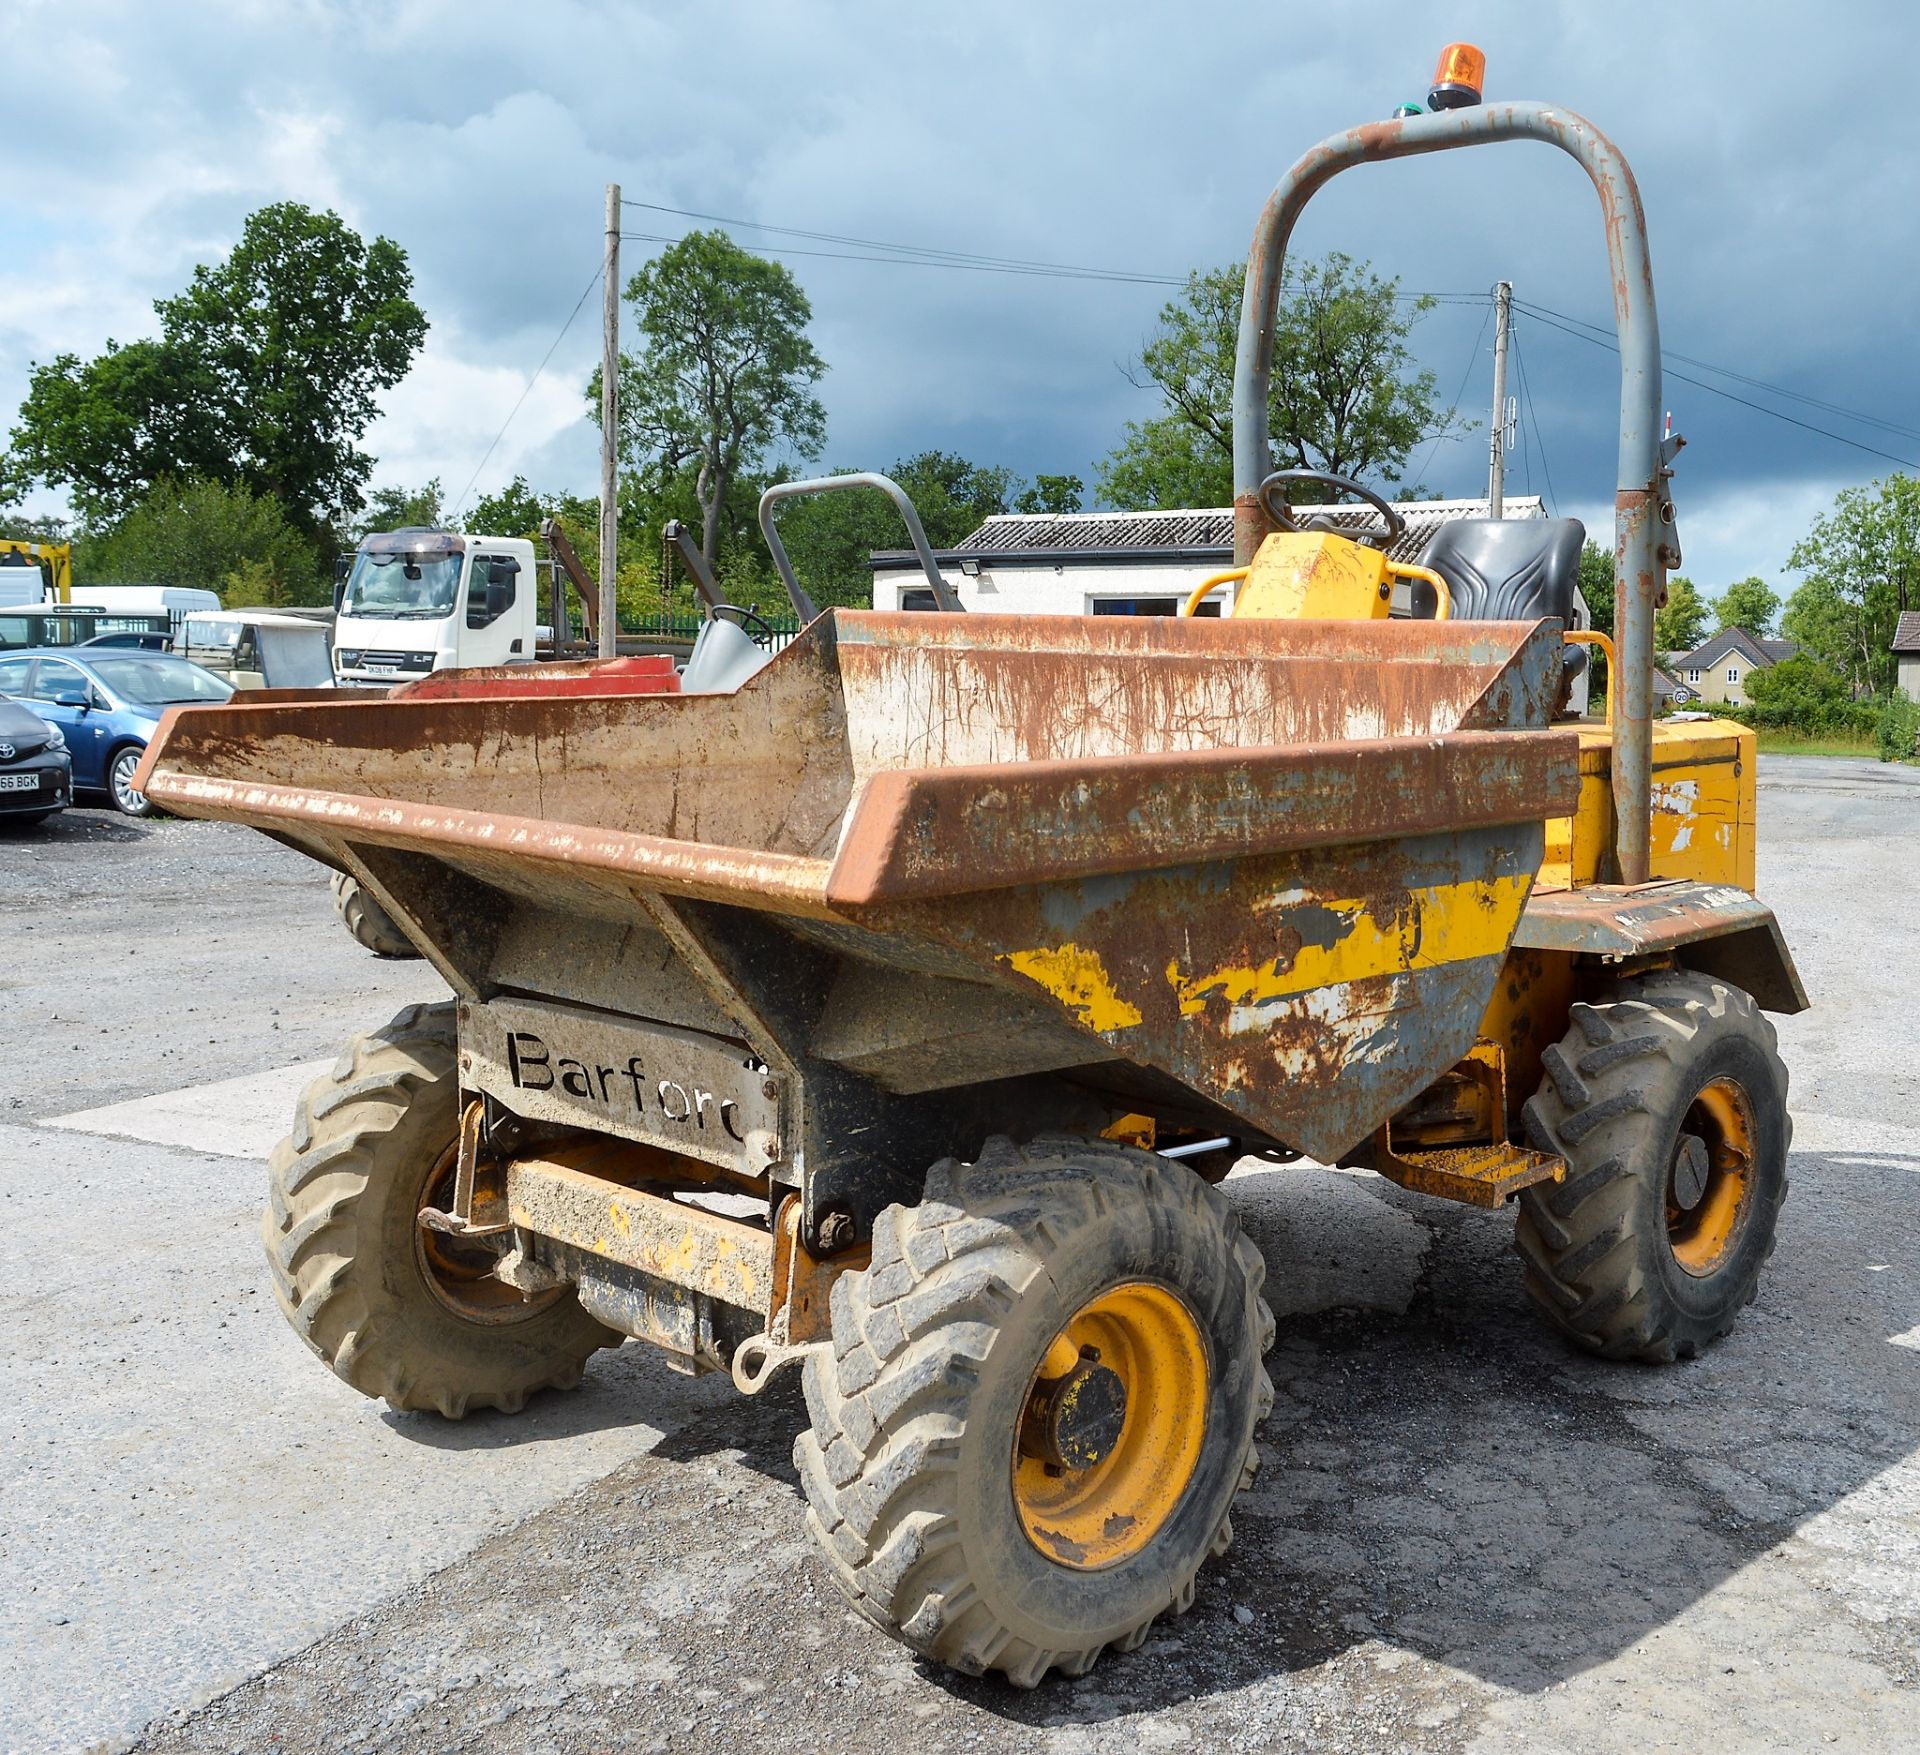 Barford 3 tonne straight skip dumper Year: 2006 S/N: SBTH0815 Recorded Hours: Not displayed (Clock